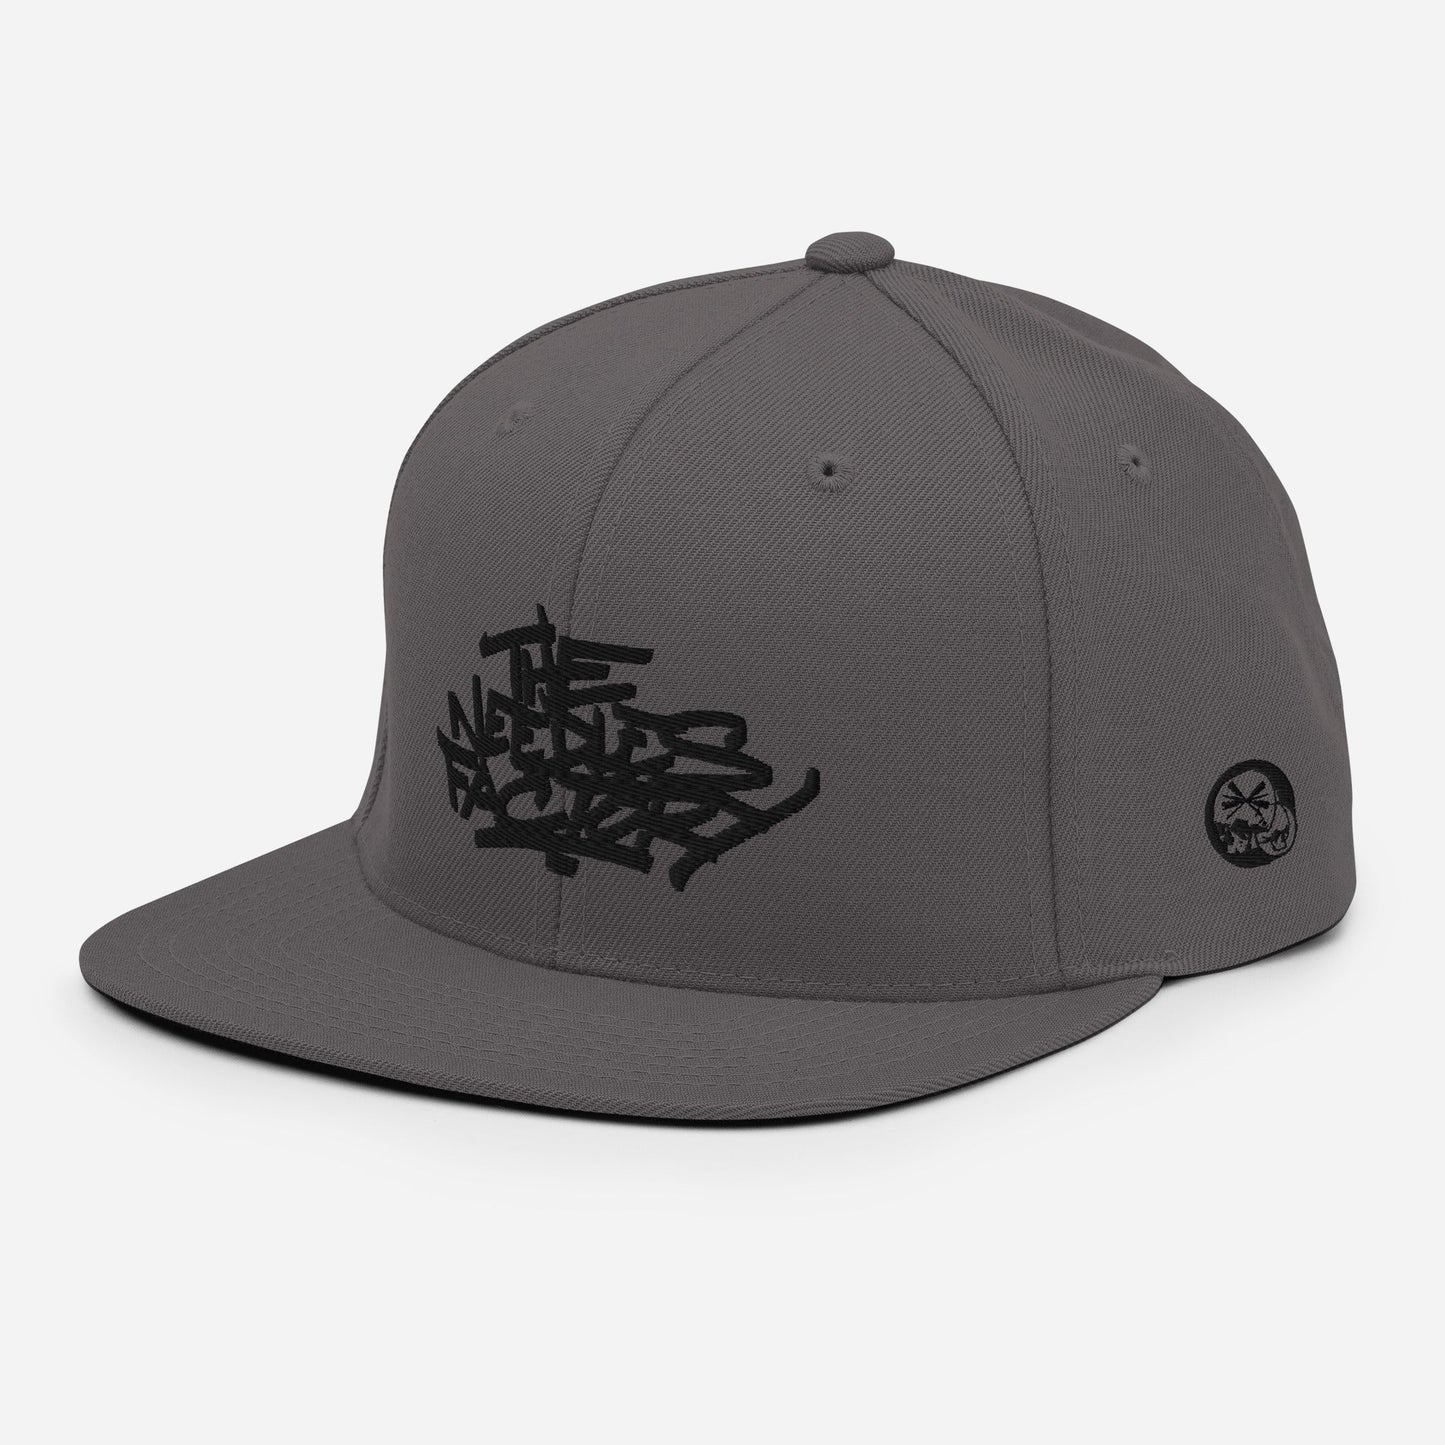 Casquette Snapback Broderie noire The Needles Factory - The Needles Factory